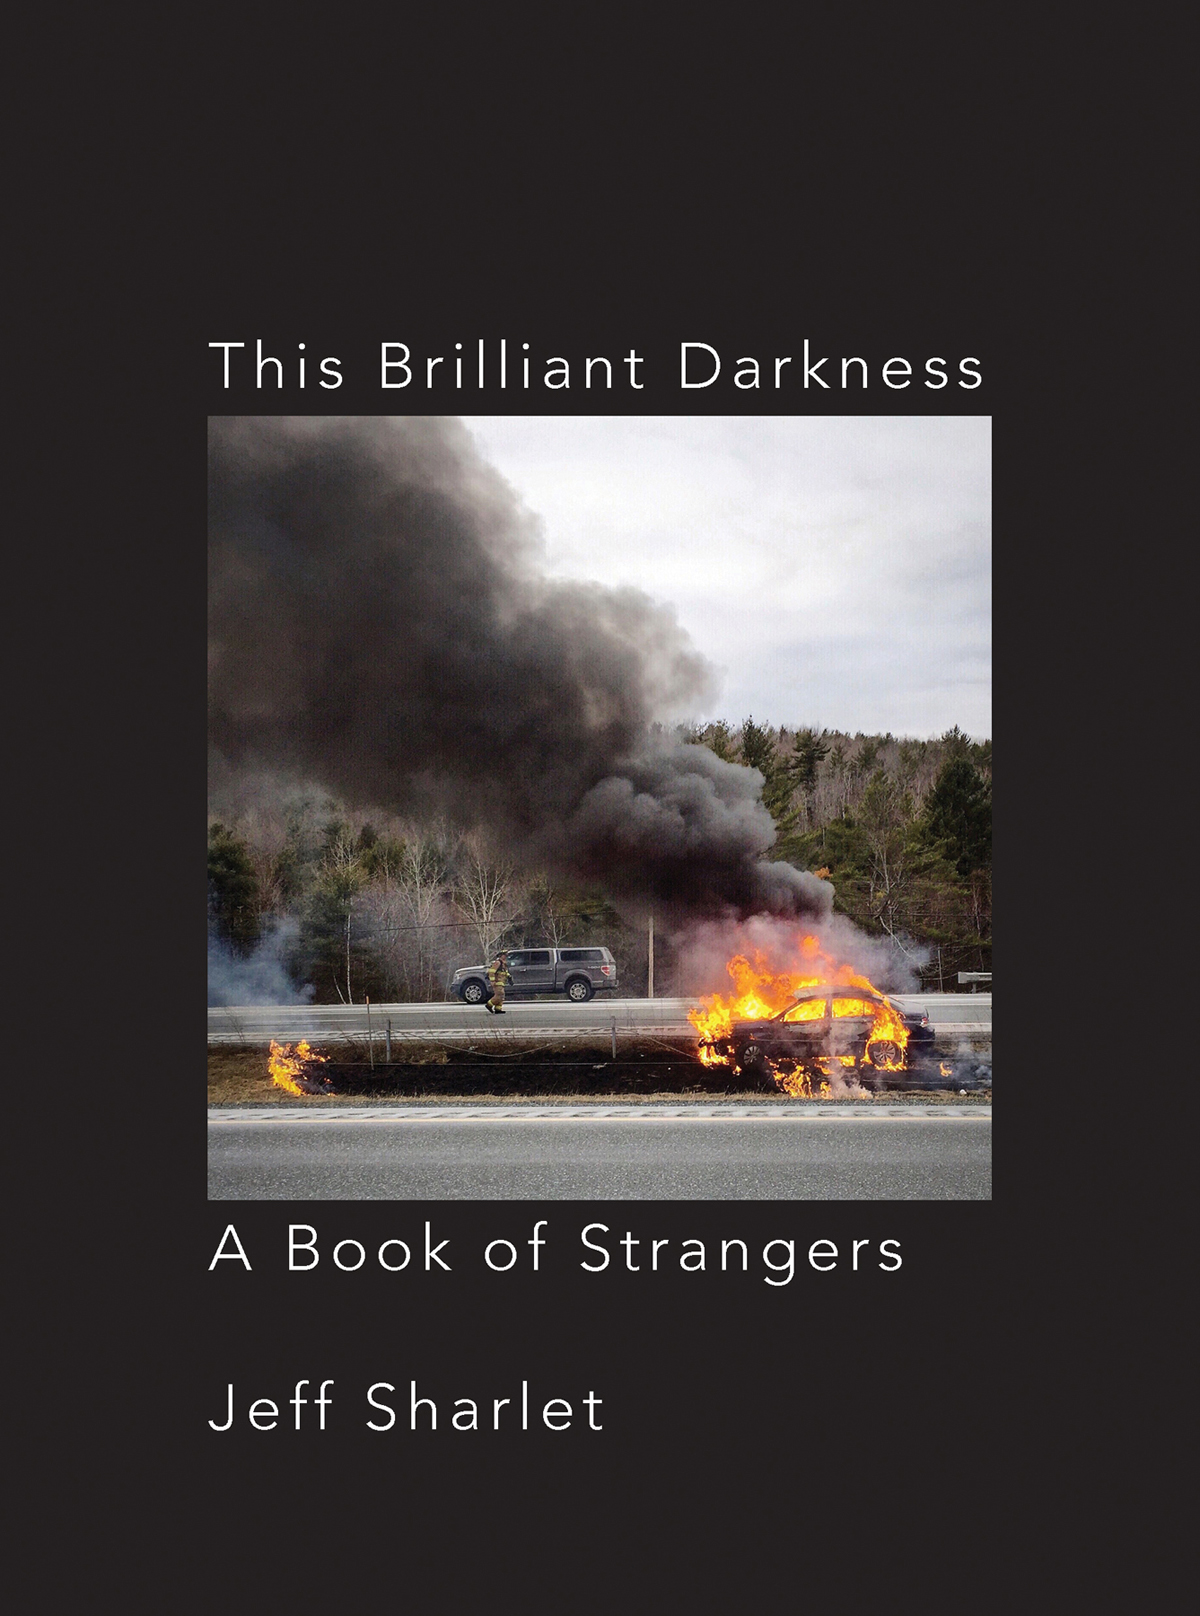 This Brilliant Darkness A Book of Strangers JEFF SHARLET For the Sun - photo 1